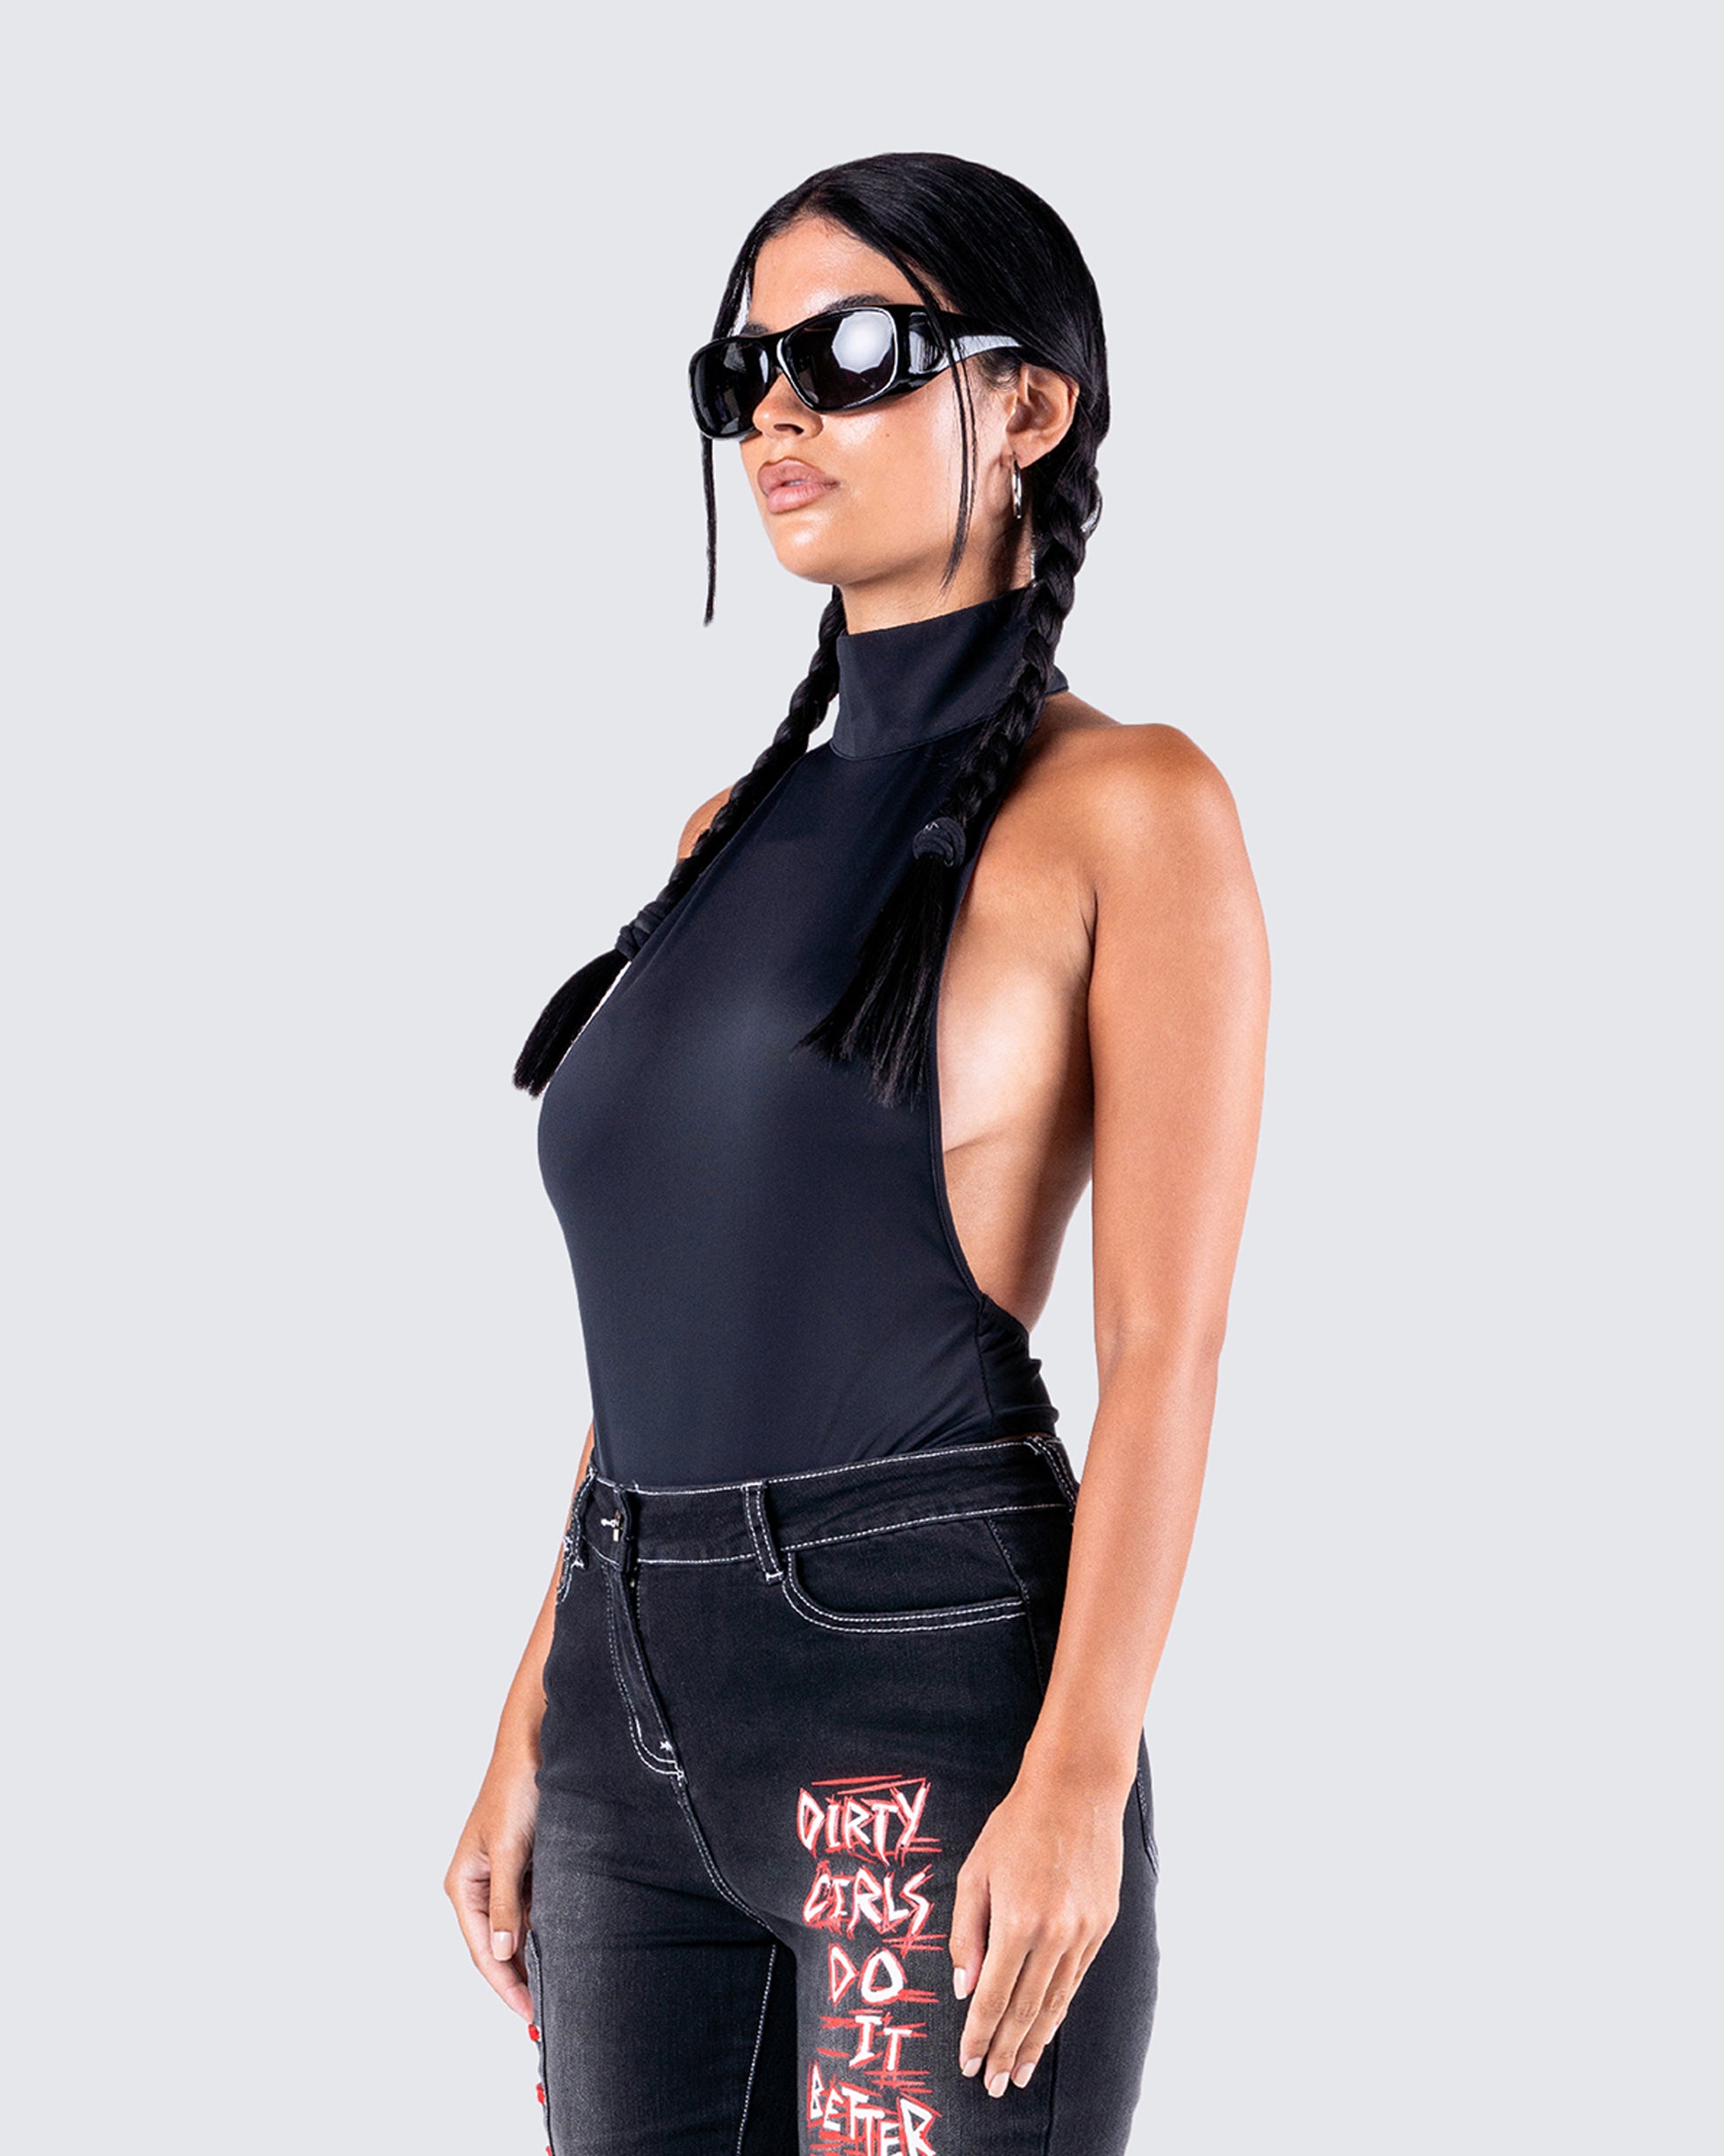 Selena Wrap Halter Top Black by Cotton On Online